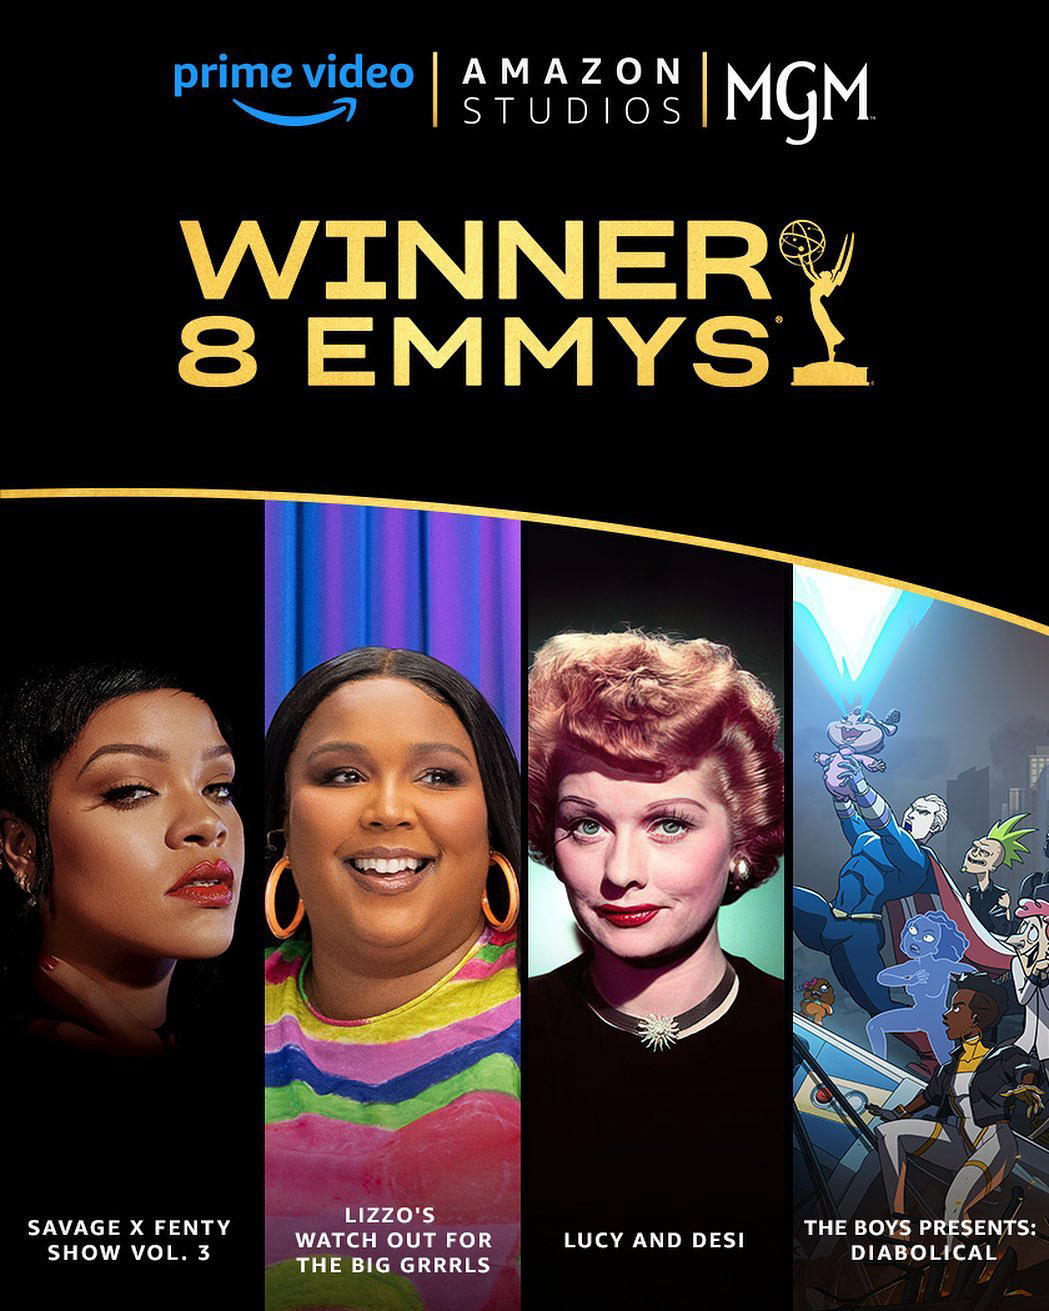 Prime Video - We are ecstatic for all of our #Emmys winners this year